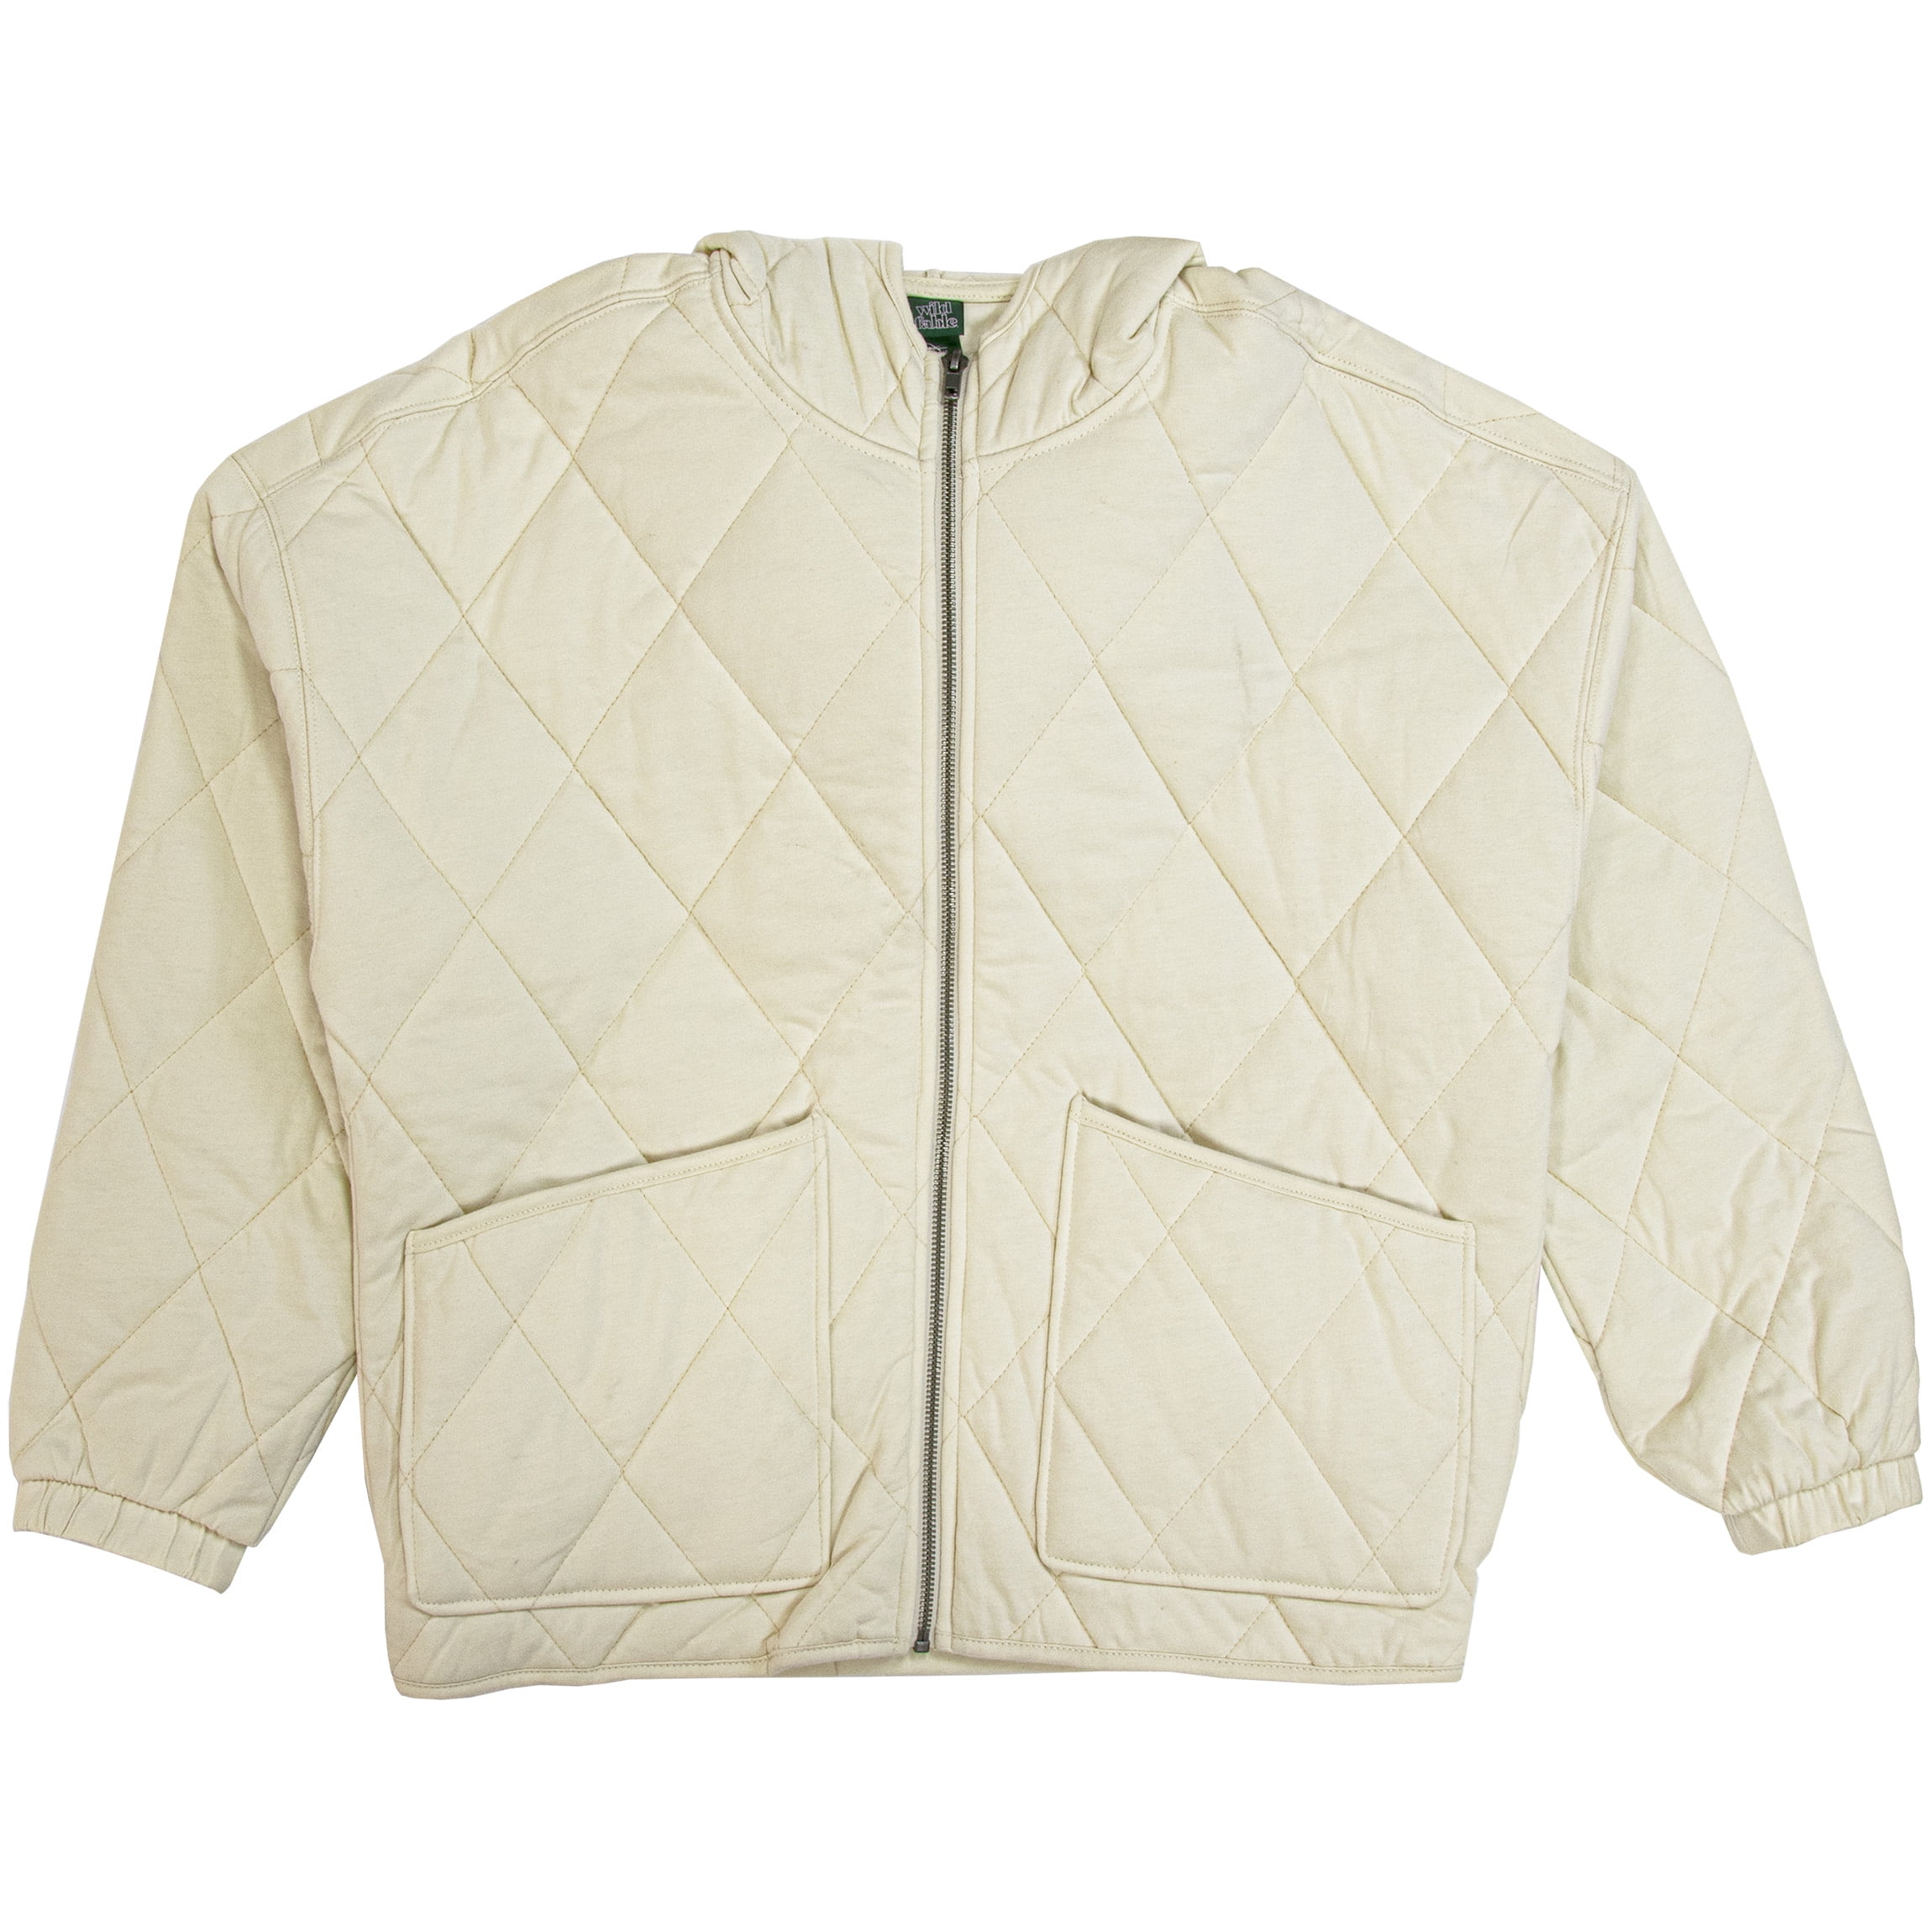 Wild Fable Women's Hooded Quilted Jacket Light Beige, M 